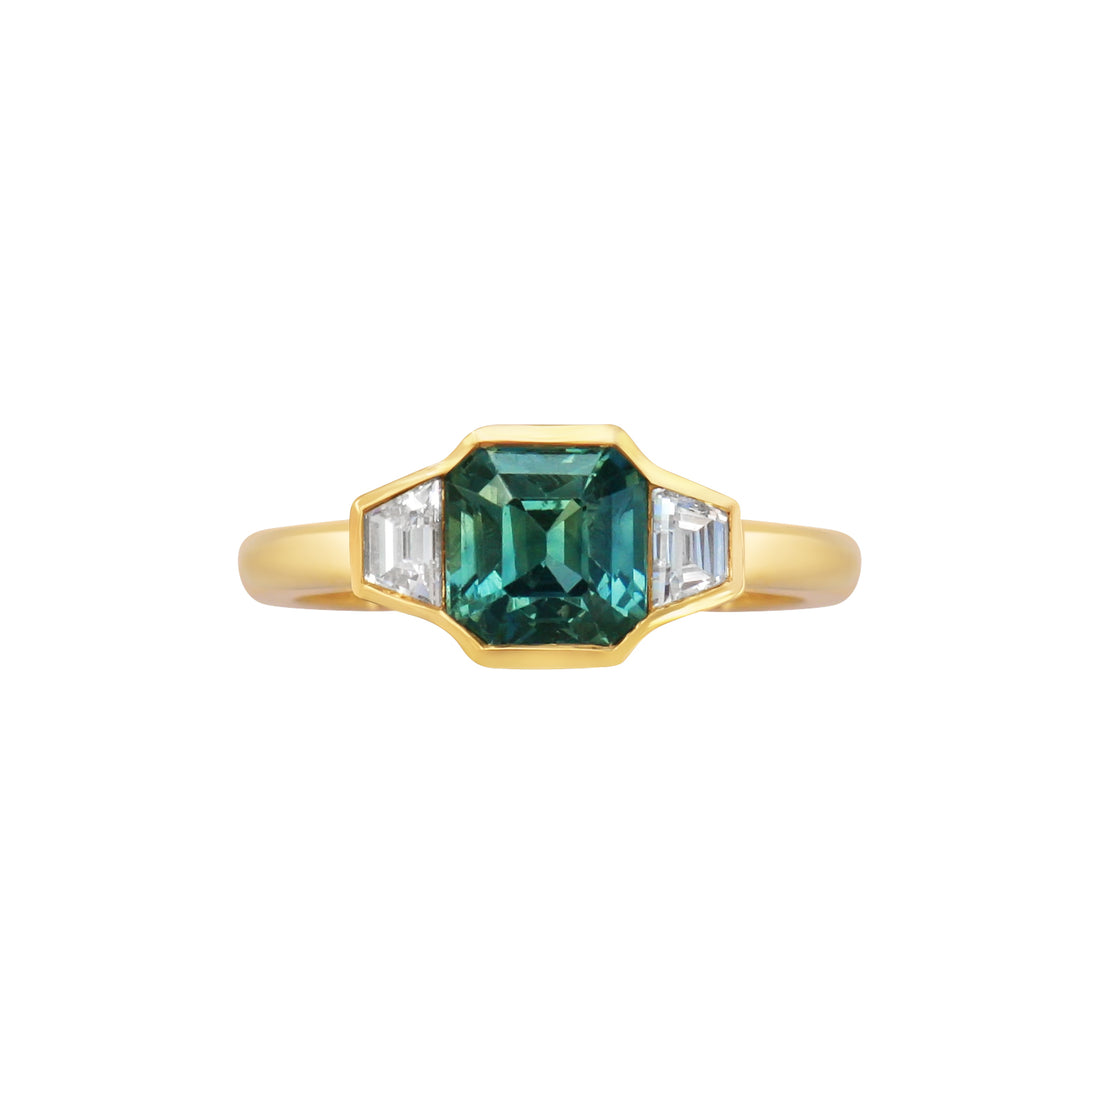  Natural Teal Sapphire and Diamond Ring by Gee Woods | The Cut London